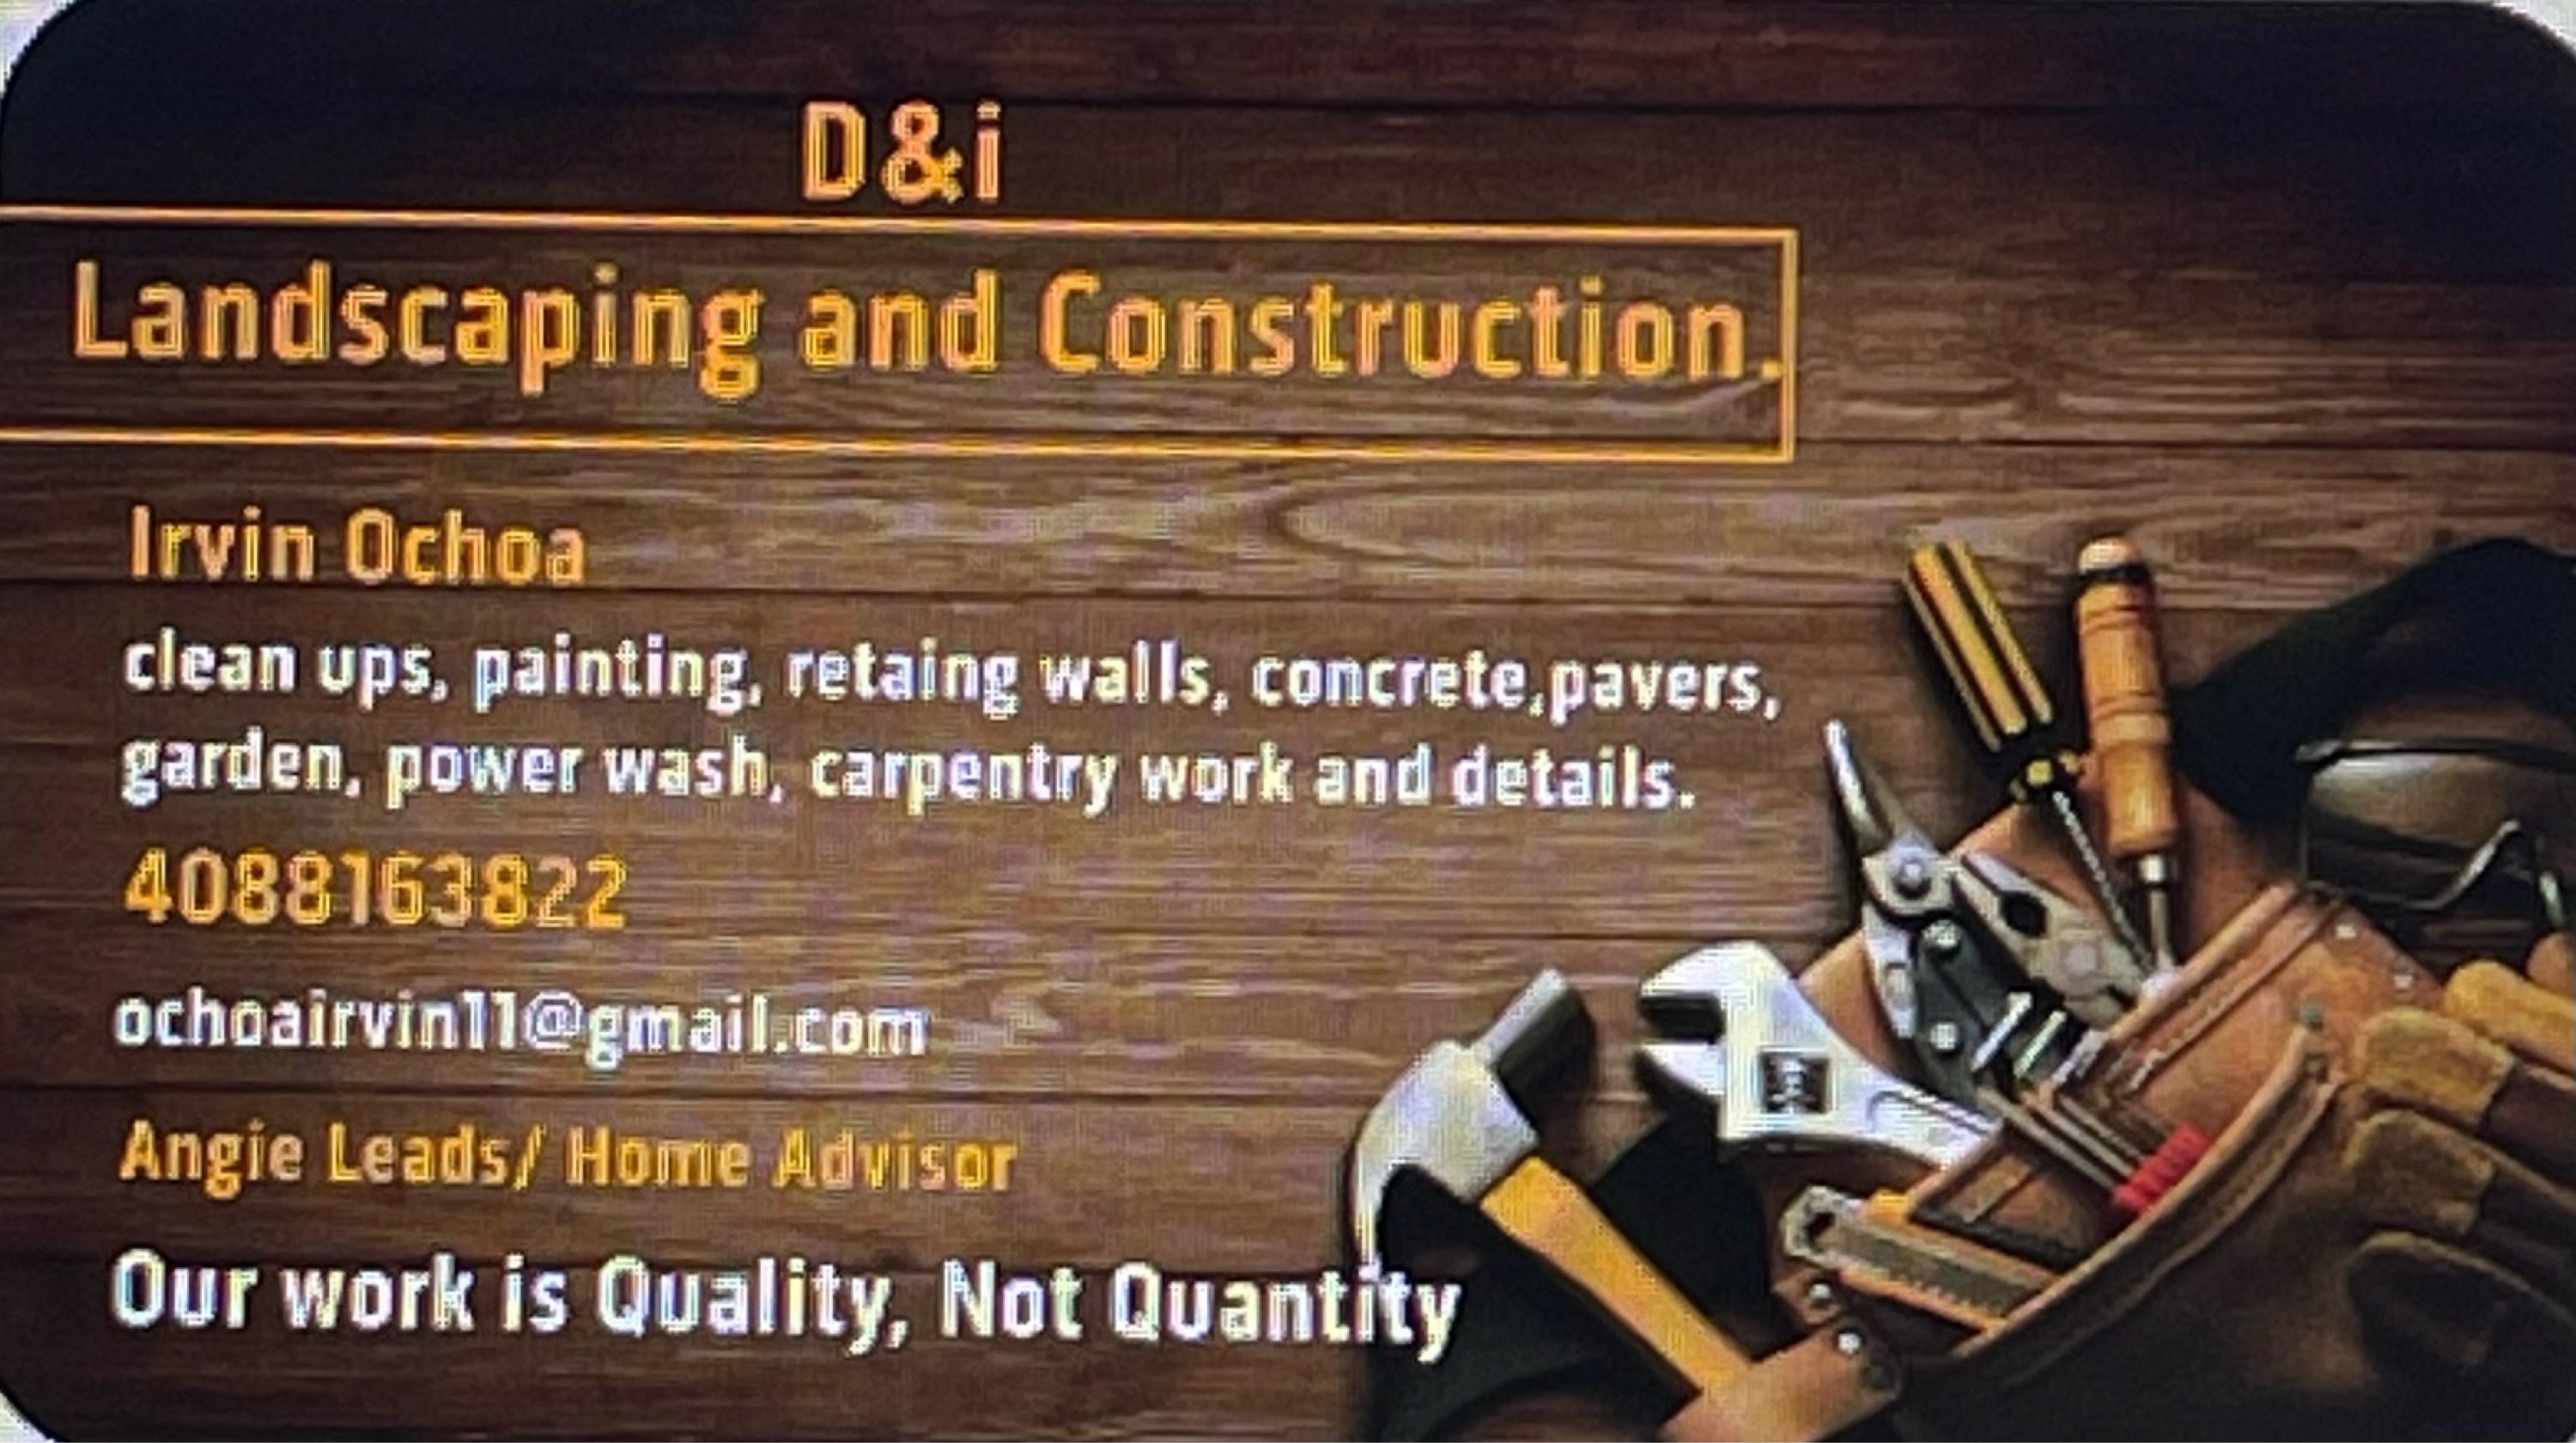 D&I Landscaping & Construction-Unlicensed Contractor Logo